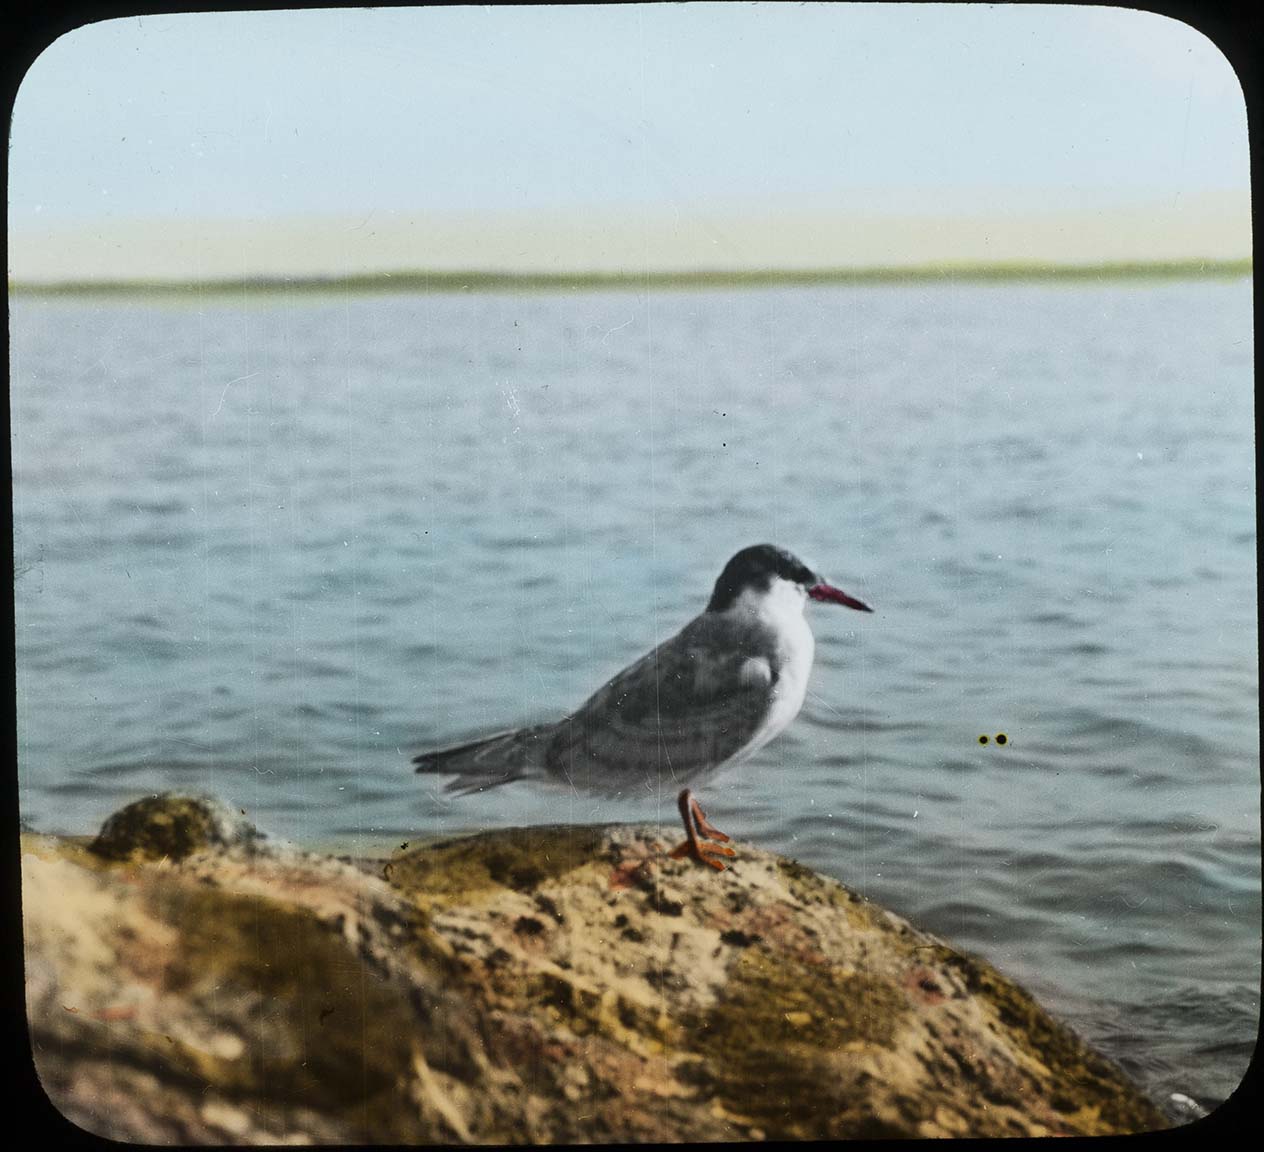 Lantern slide and photograph of a young Forster's Tern perching on a rocky shore